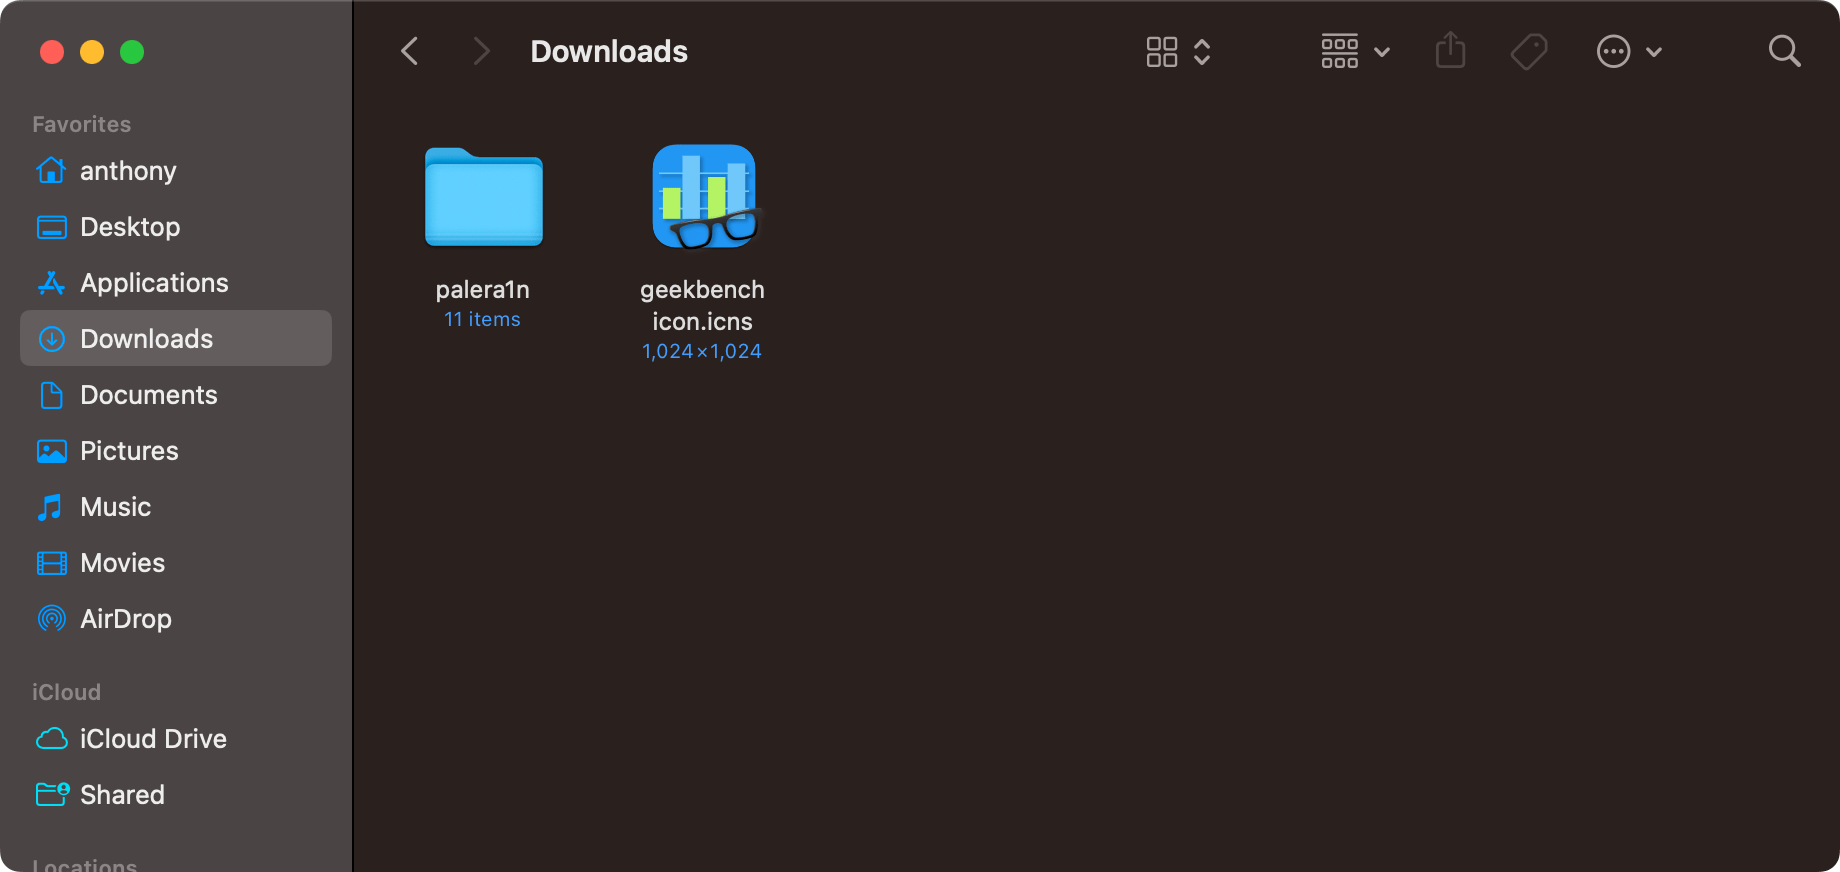 Geekbench icon downloaded.